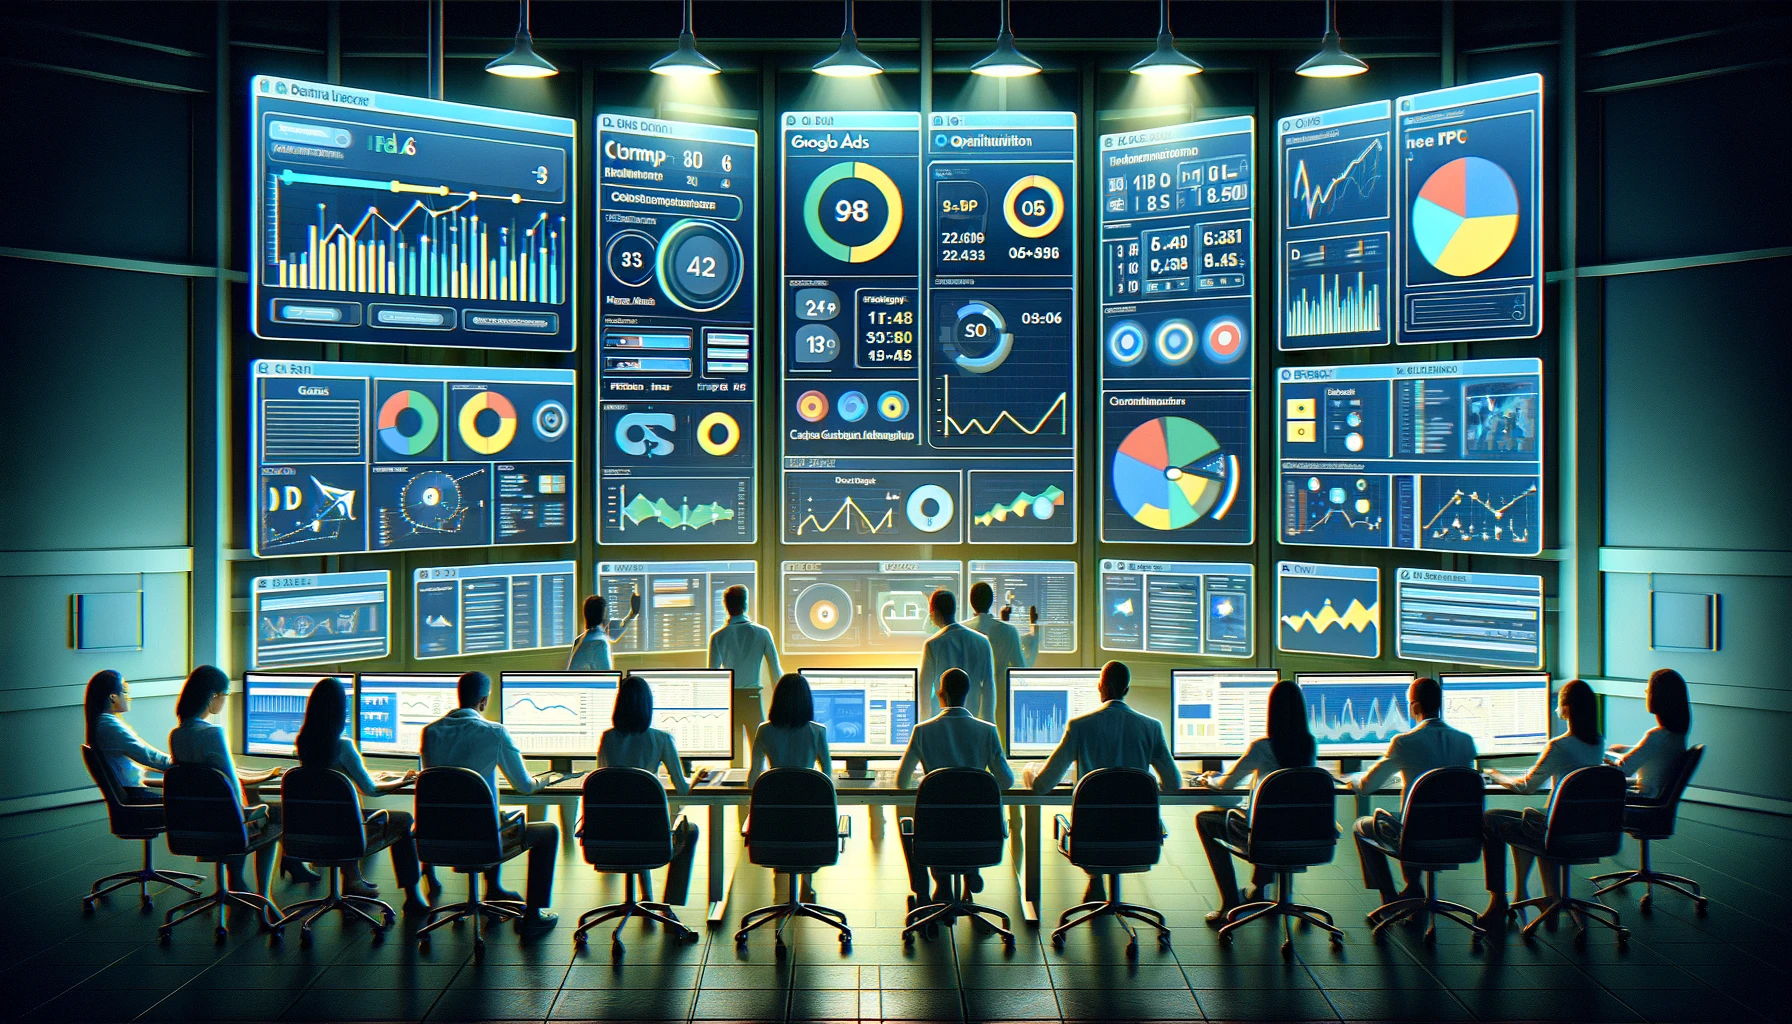 Digital marketing professionals at a control center analysing Google Ads PPC data on large screens